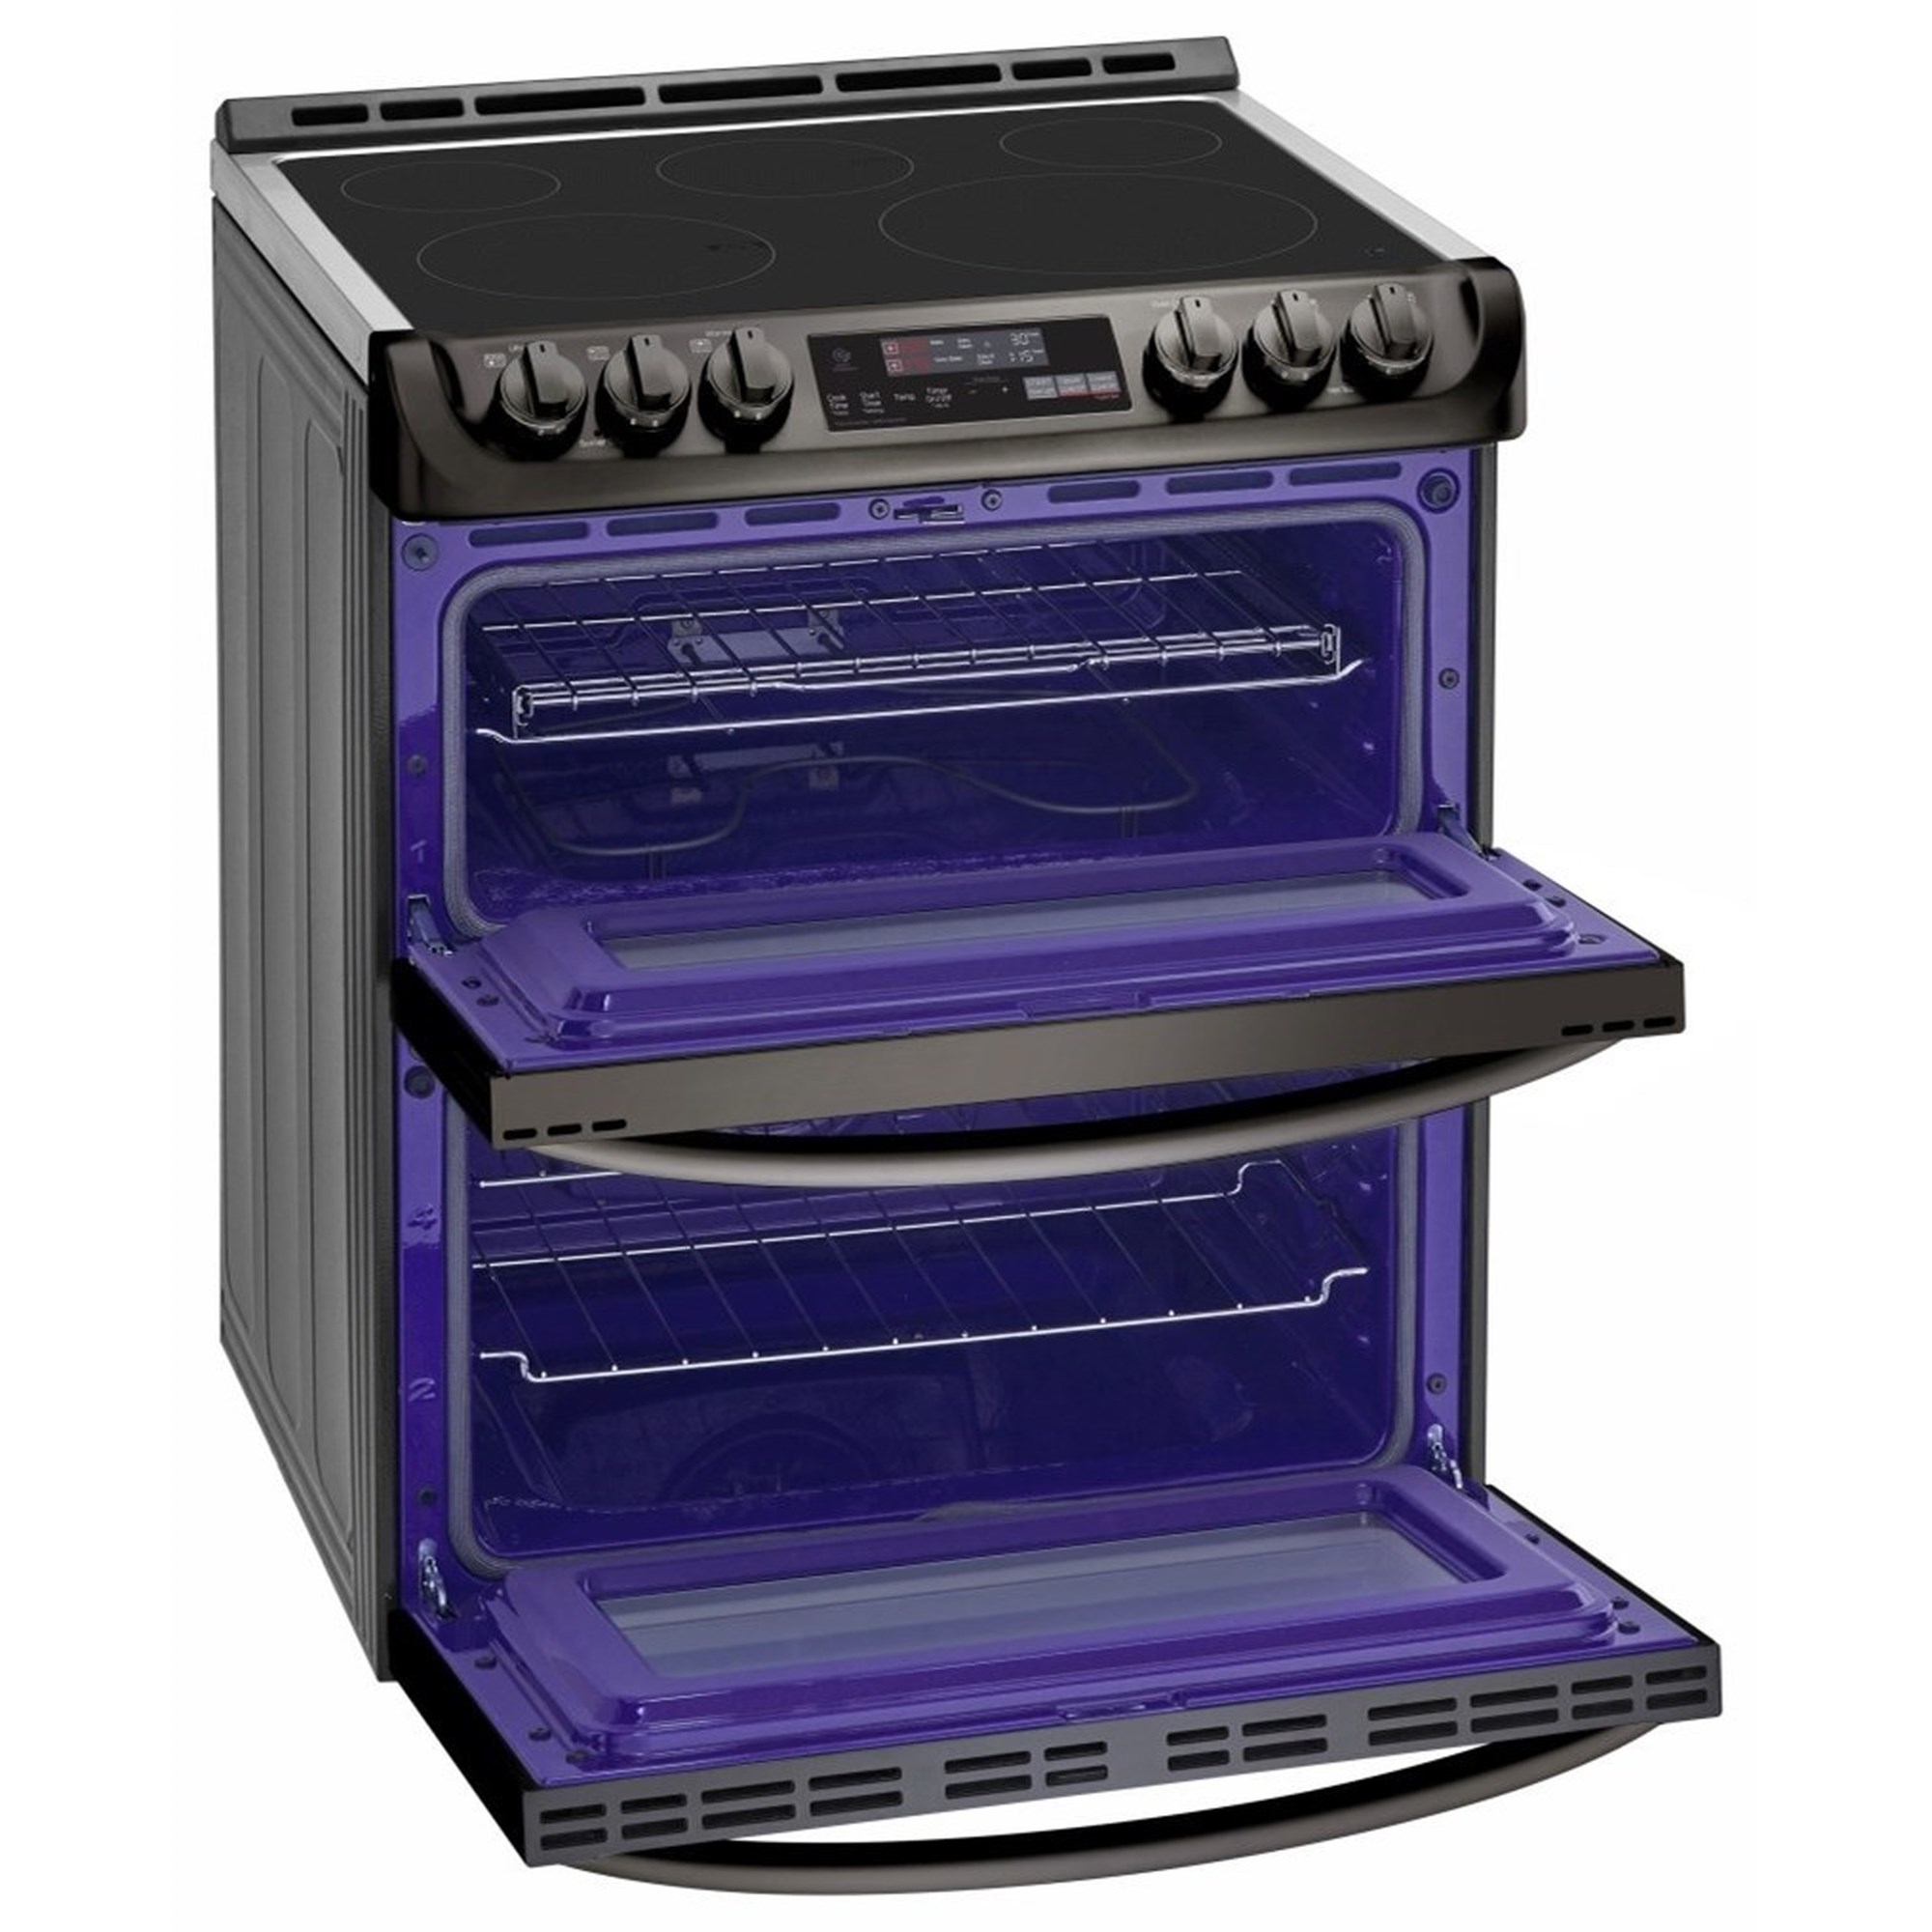 LG 7.3 cu. ft. Electric Double Oven Range with ProBake Convection